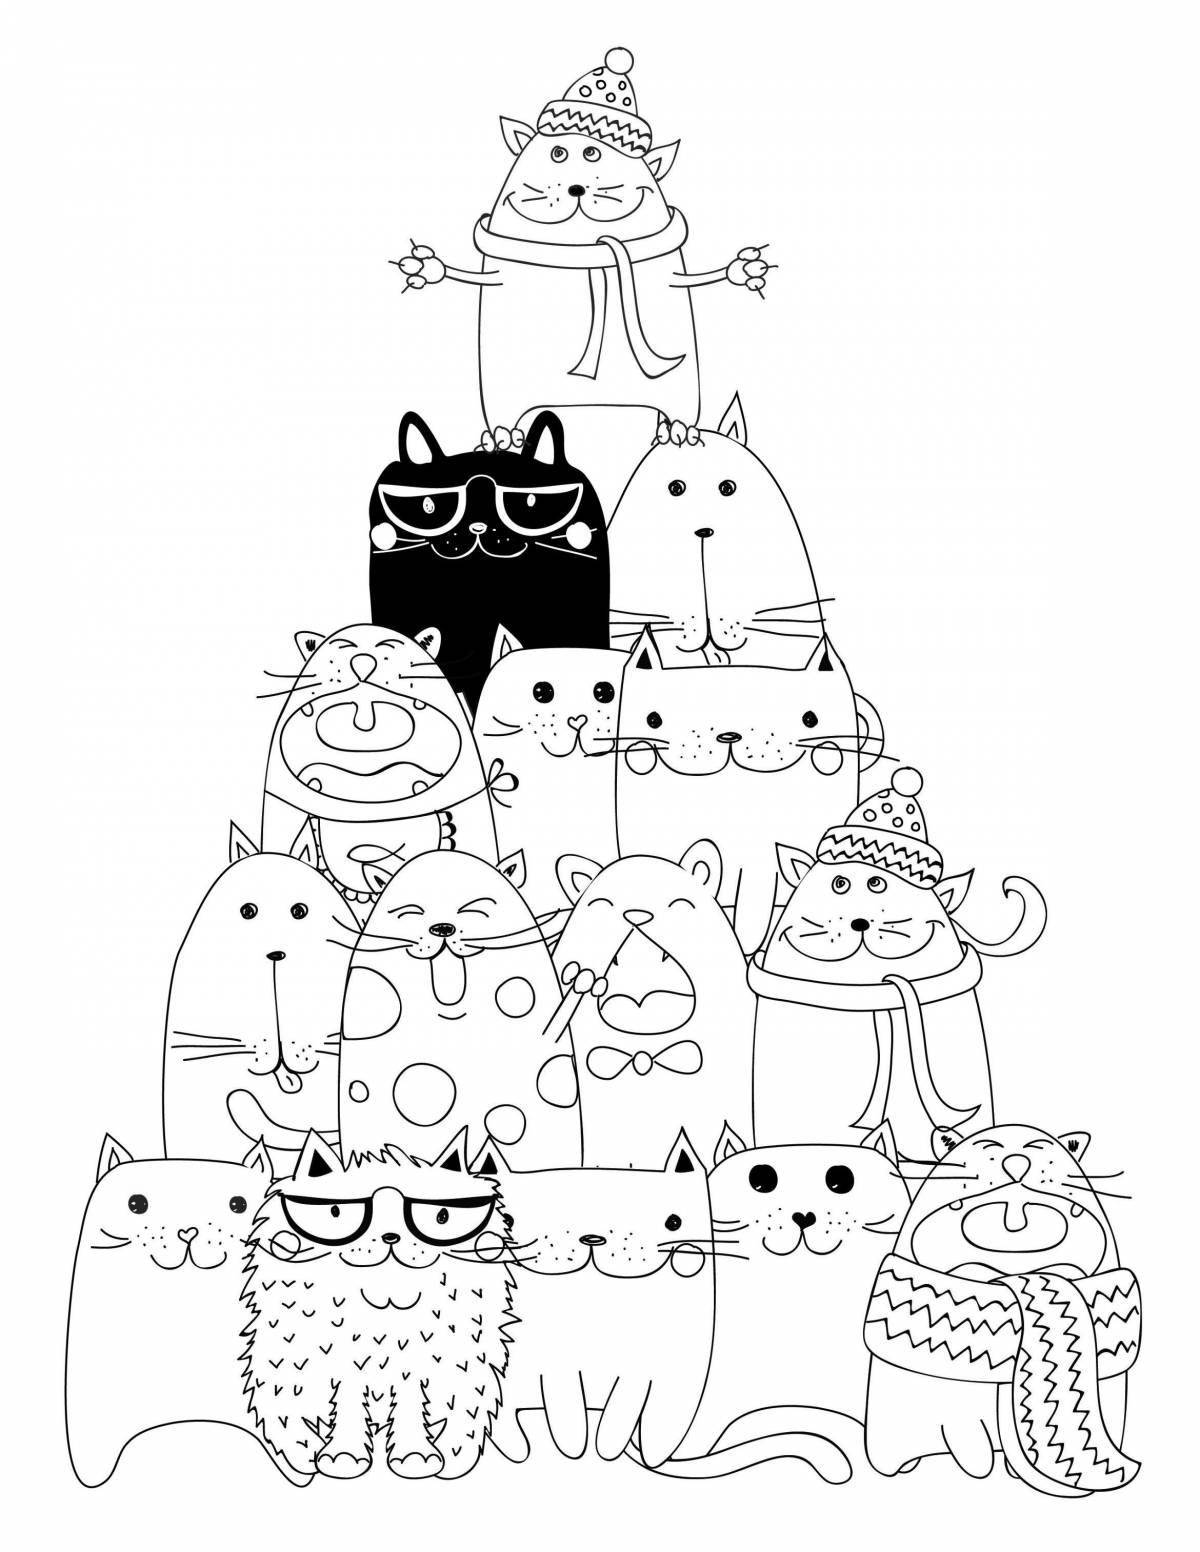 Bright cute Christmas coloring book